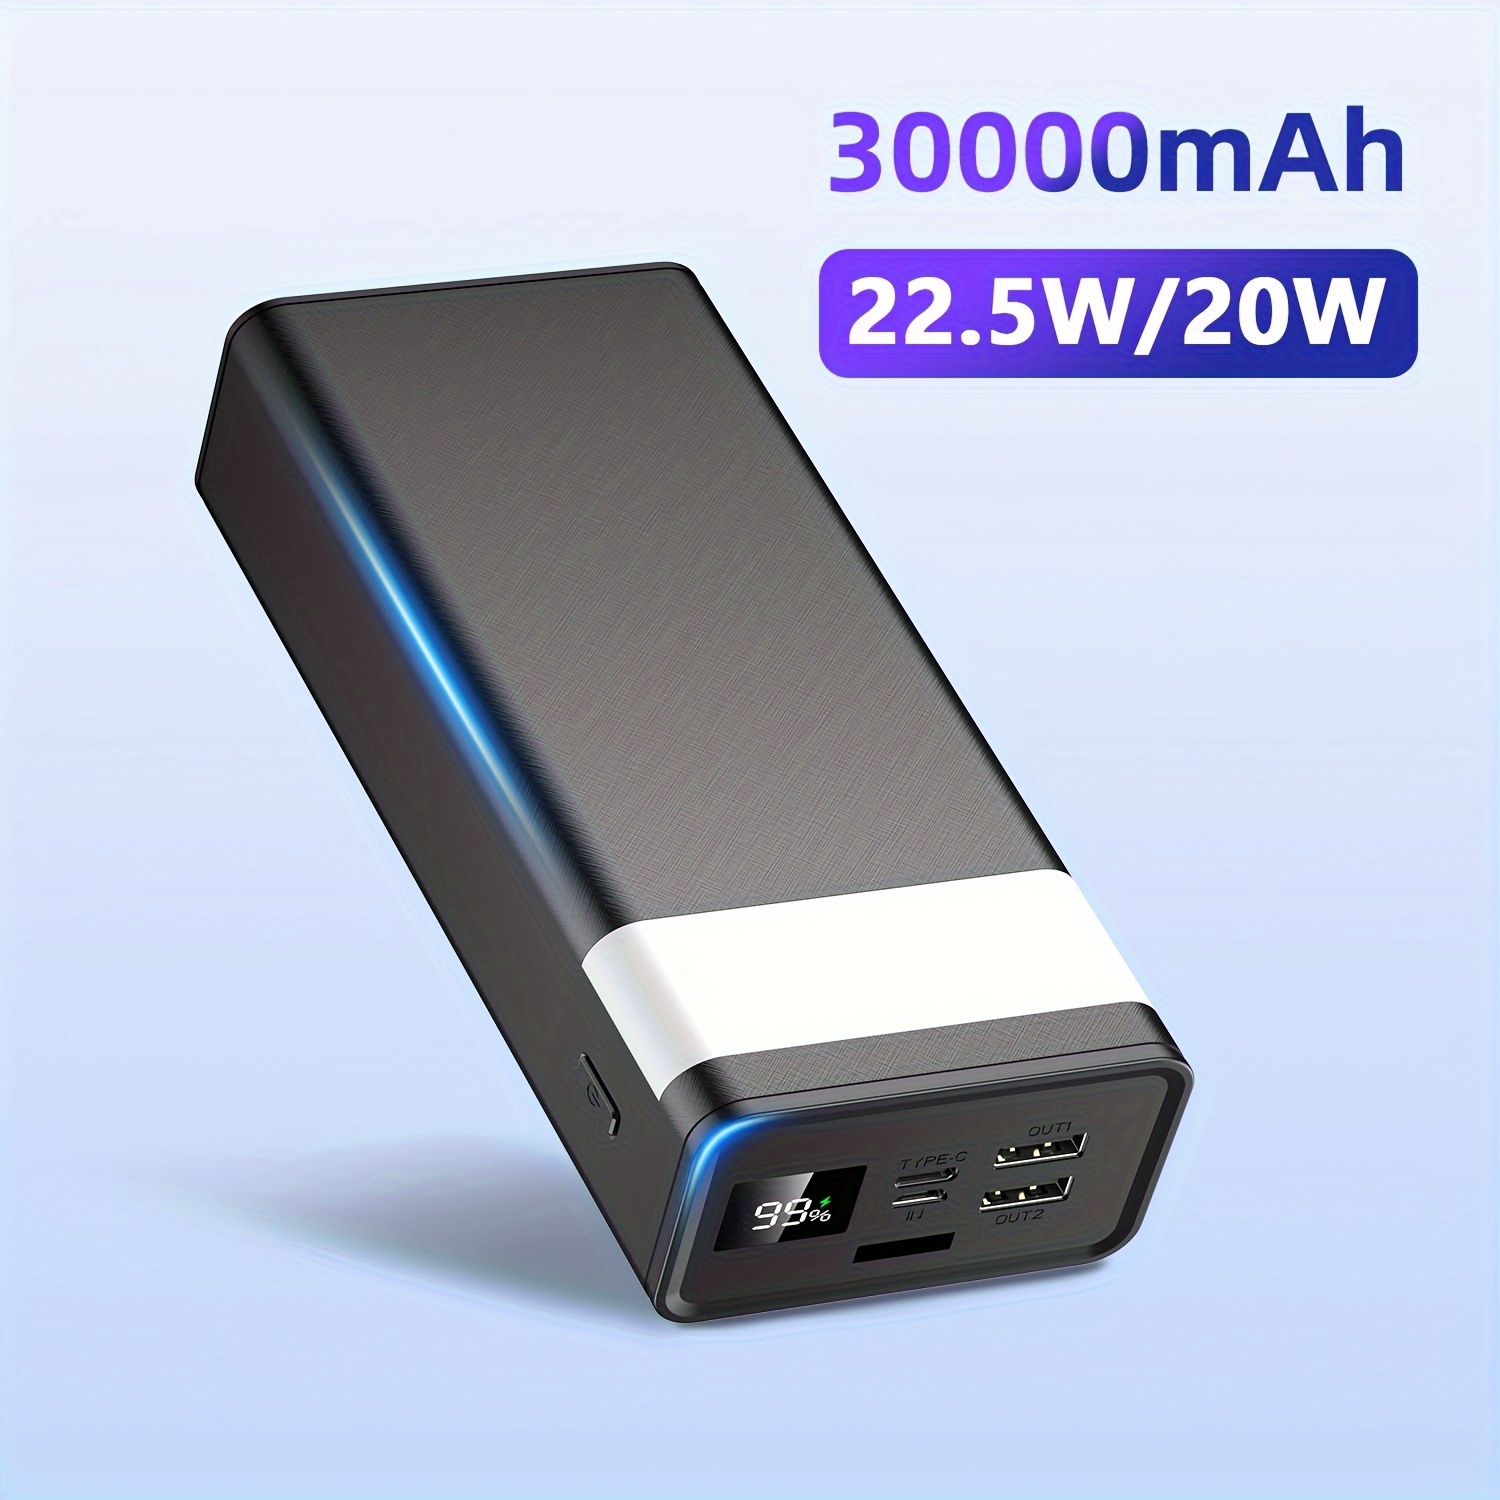 50000mAh Power Bank, Dual USB Outputs Mini Portable Charger 50000 mAh Fast  Charging External Battery Pack Charger Powerbank for IPhone 12 Mini Pro Pro